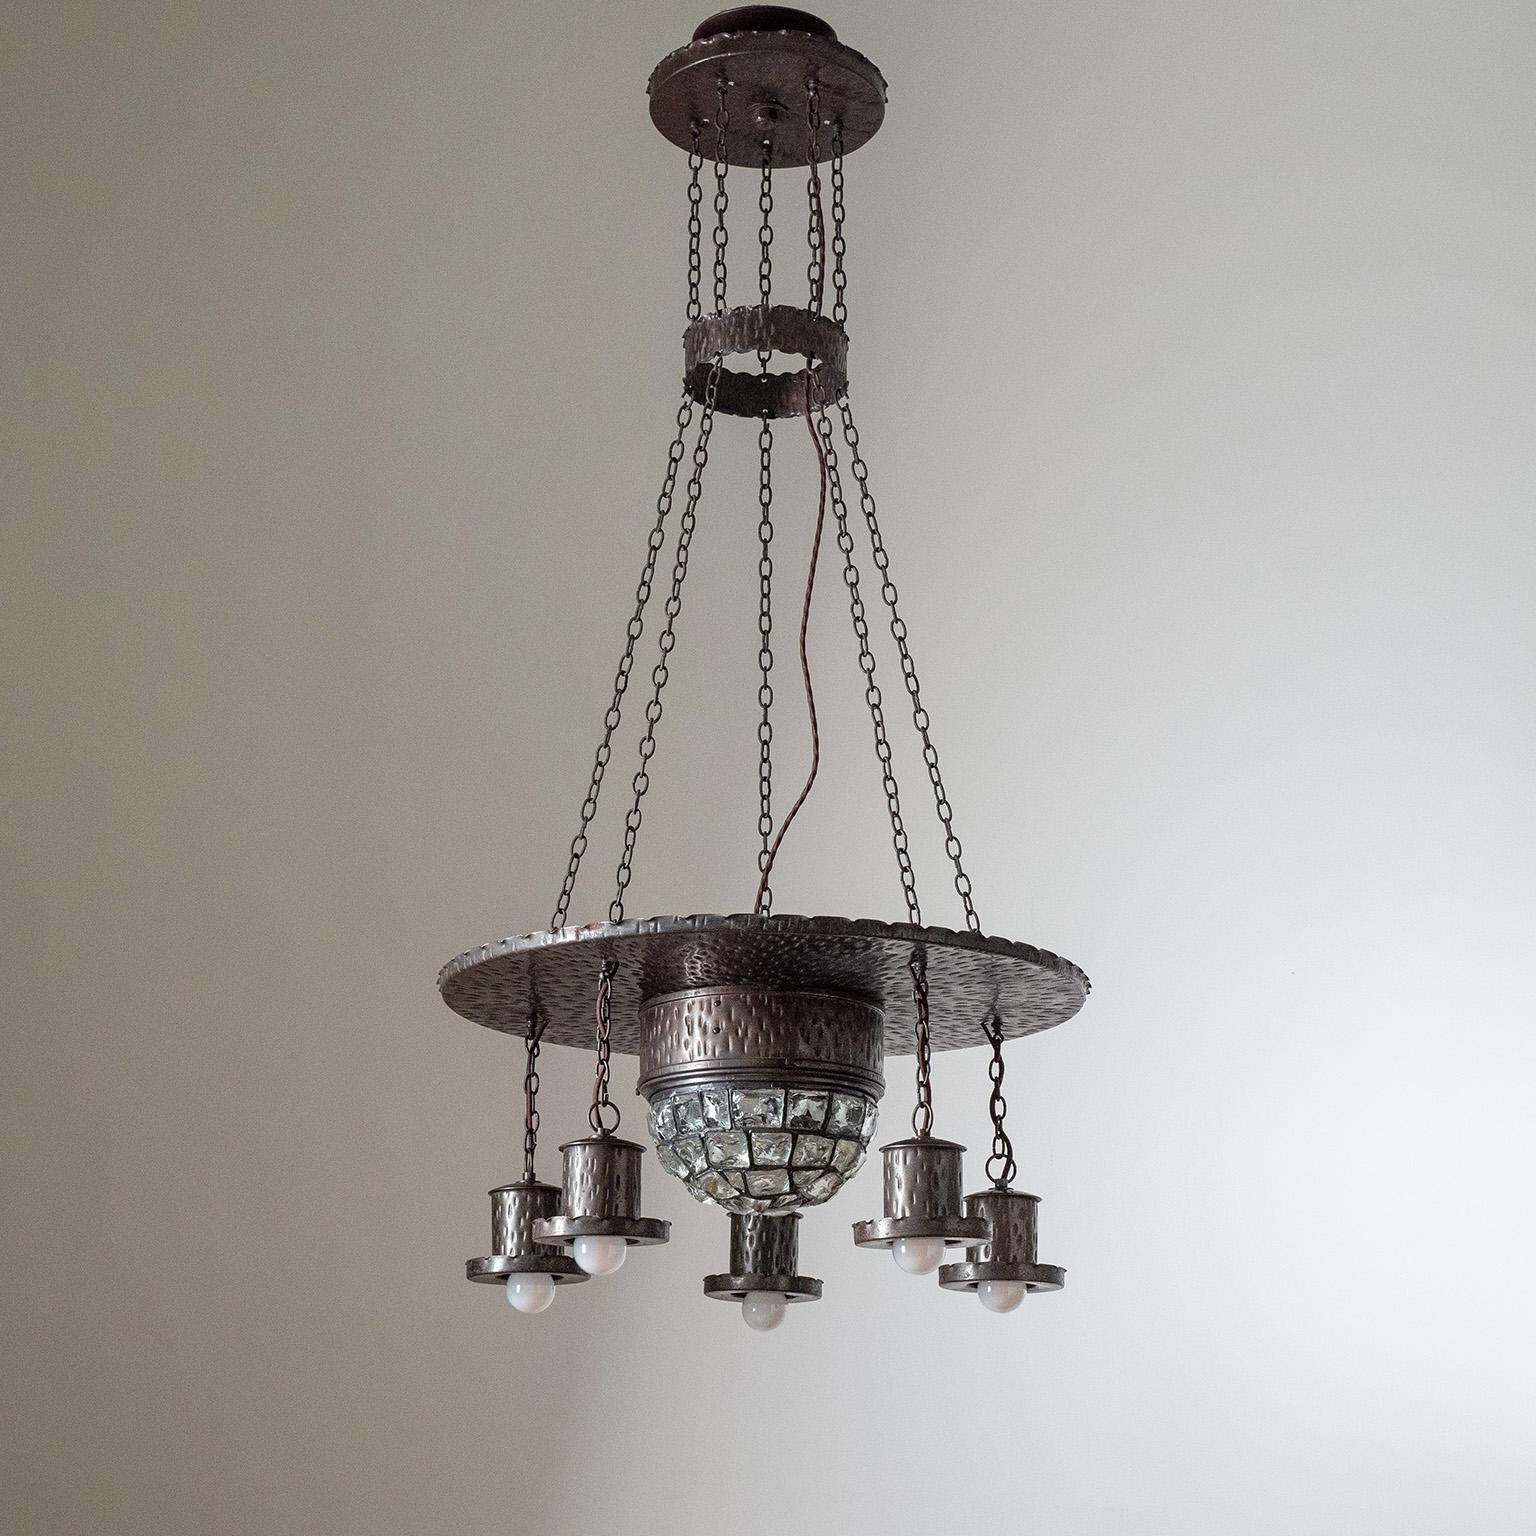 Rare Arts & Crafts wrought iron suspension chandelier from the early 20th century (1910-1920s). The entire structure is copper-plated with a lovely dark aged patina. Center piece is made of chunks of glass. Original copper and ceramic E27 sockets